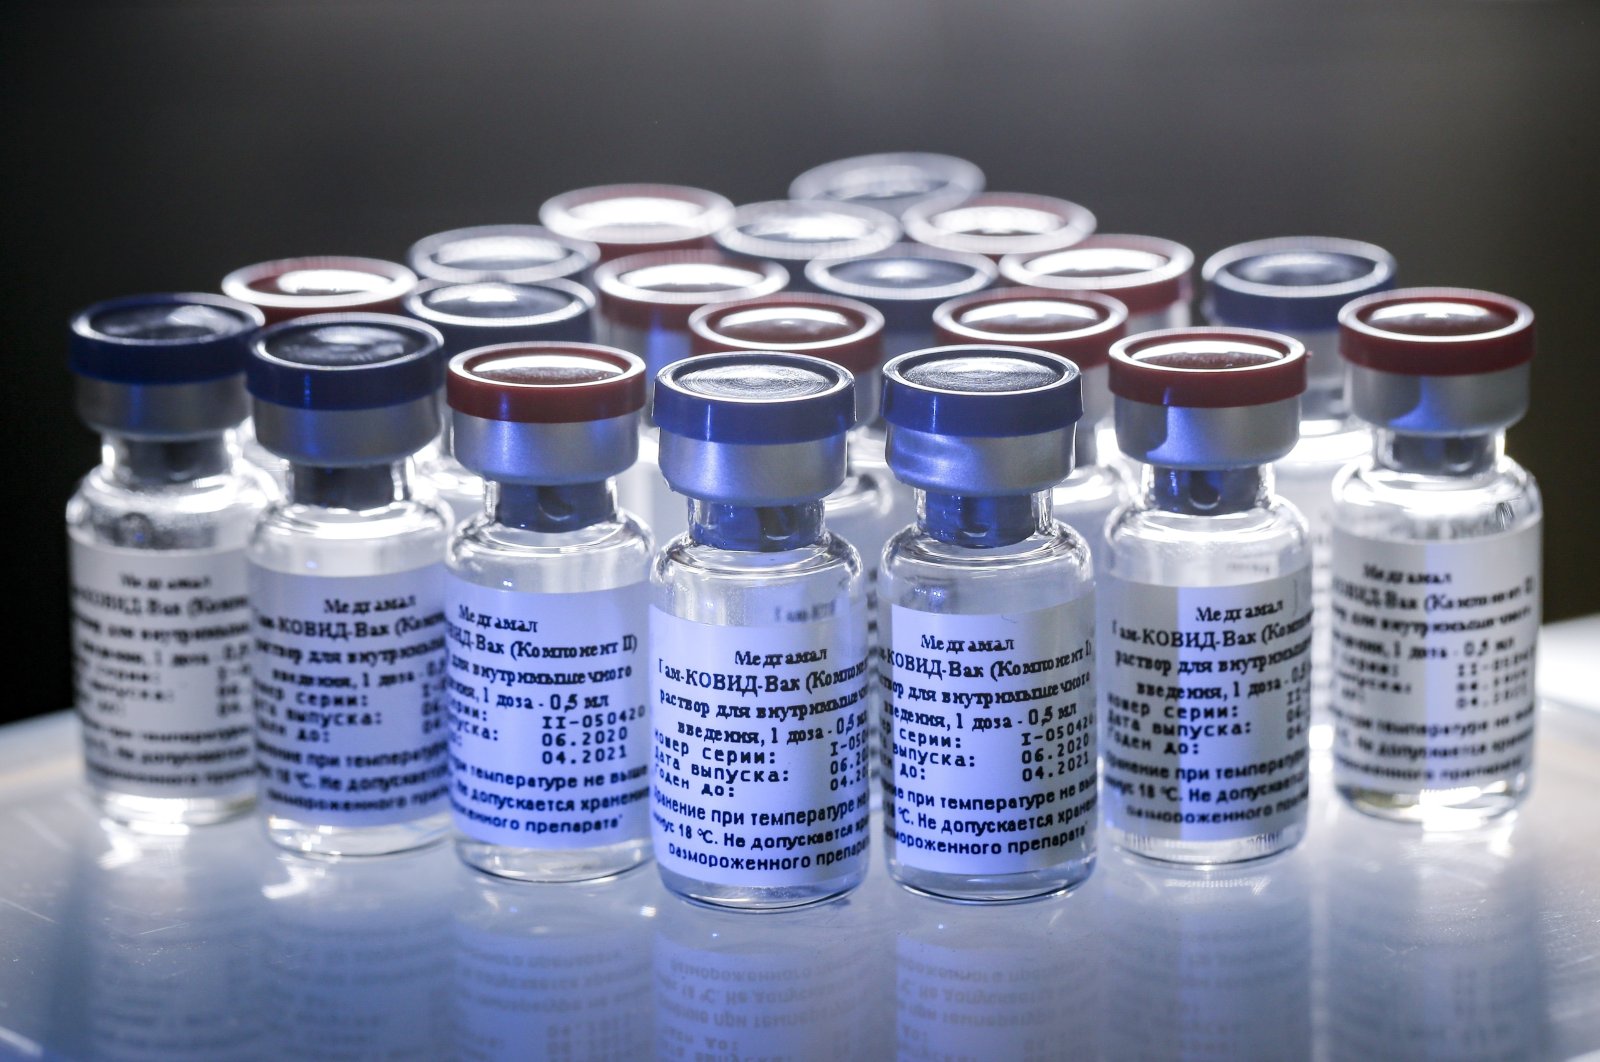 A COVID-19 vaccine is on display at the Nikolai Gamaleya National Center of Epidemiology and Microbiology in Moscow, Russia, Aug. 6, 2020. (Russian Direct Investment Fund via AP)